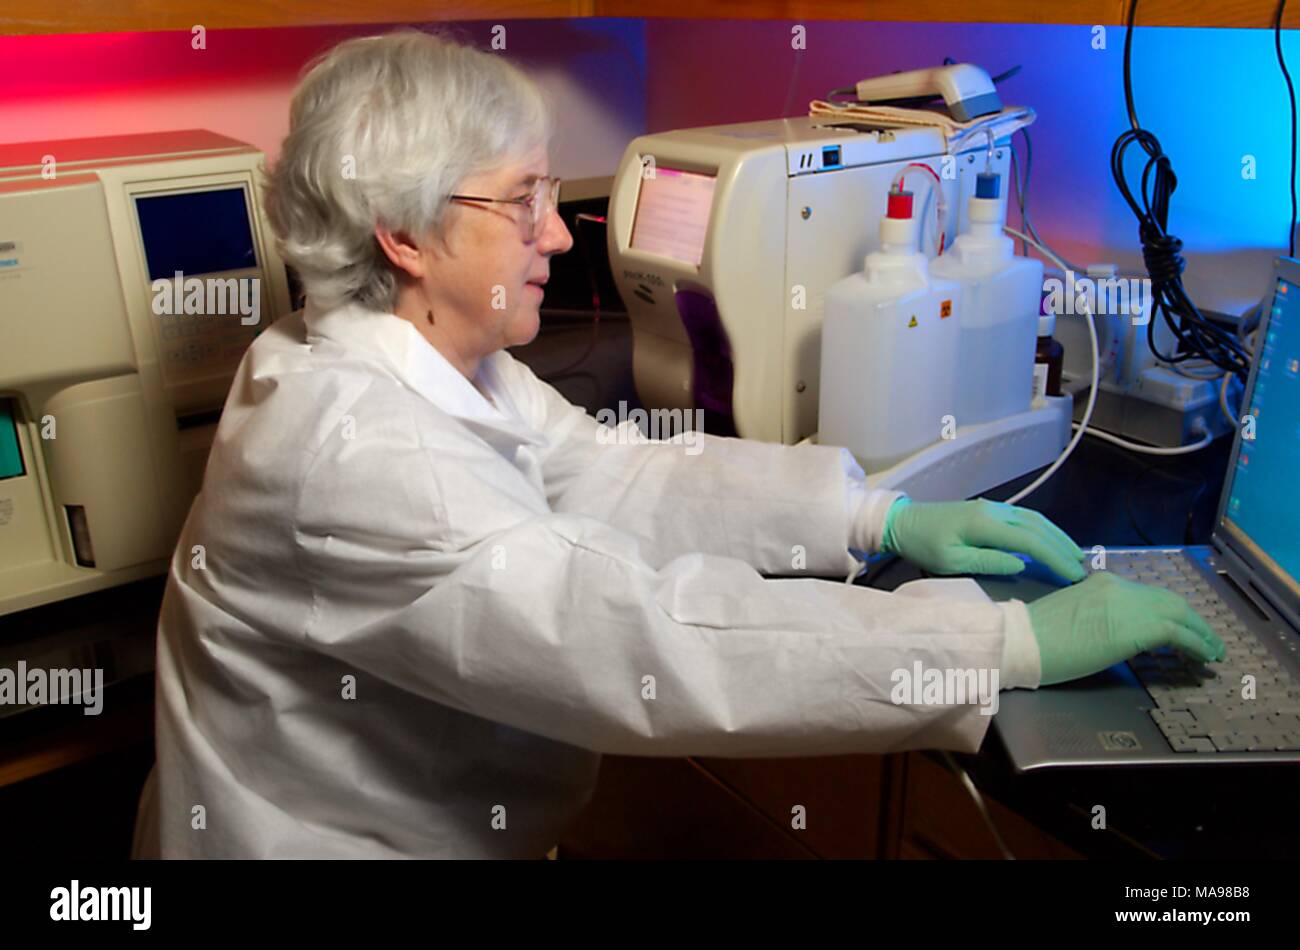 Photograph of Cynthia Warner, a CDC Clinical Monitoring Team member, in a working laboratory setting, next to machines and a computer, testing the effectiveness of anti-retroviral medications on HIV infected blood samples, as part of the Global AIDS program, 2007. Image courtesy CDC/Hsi Liu, James Gathany. () Stock Photo